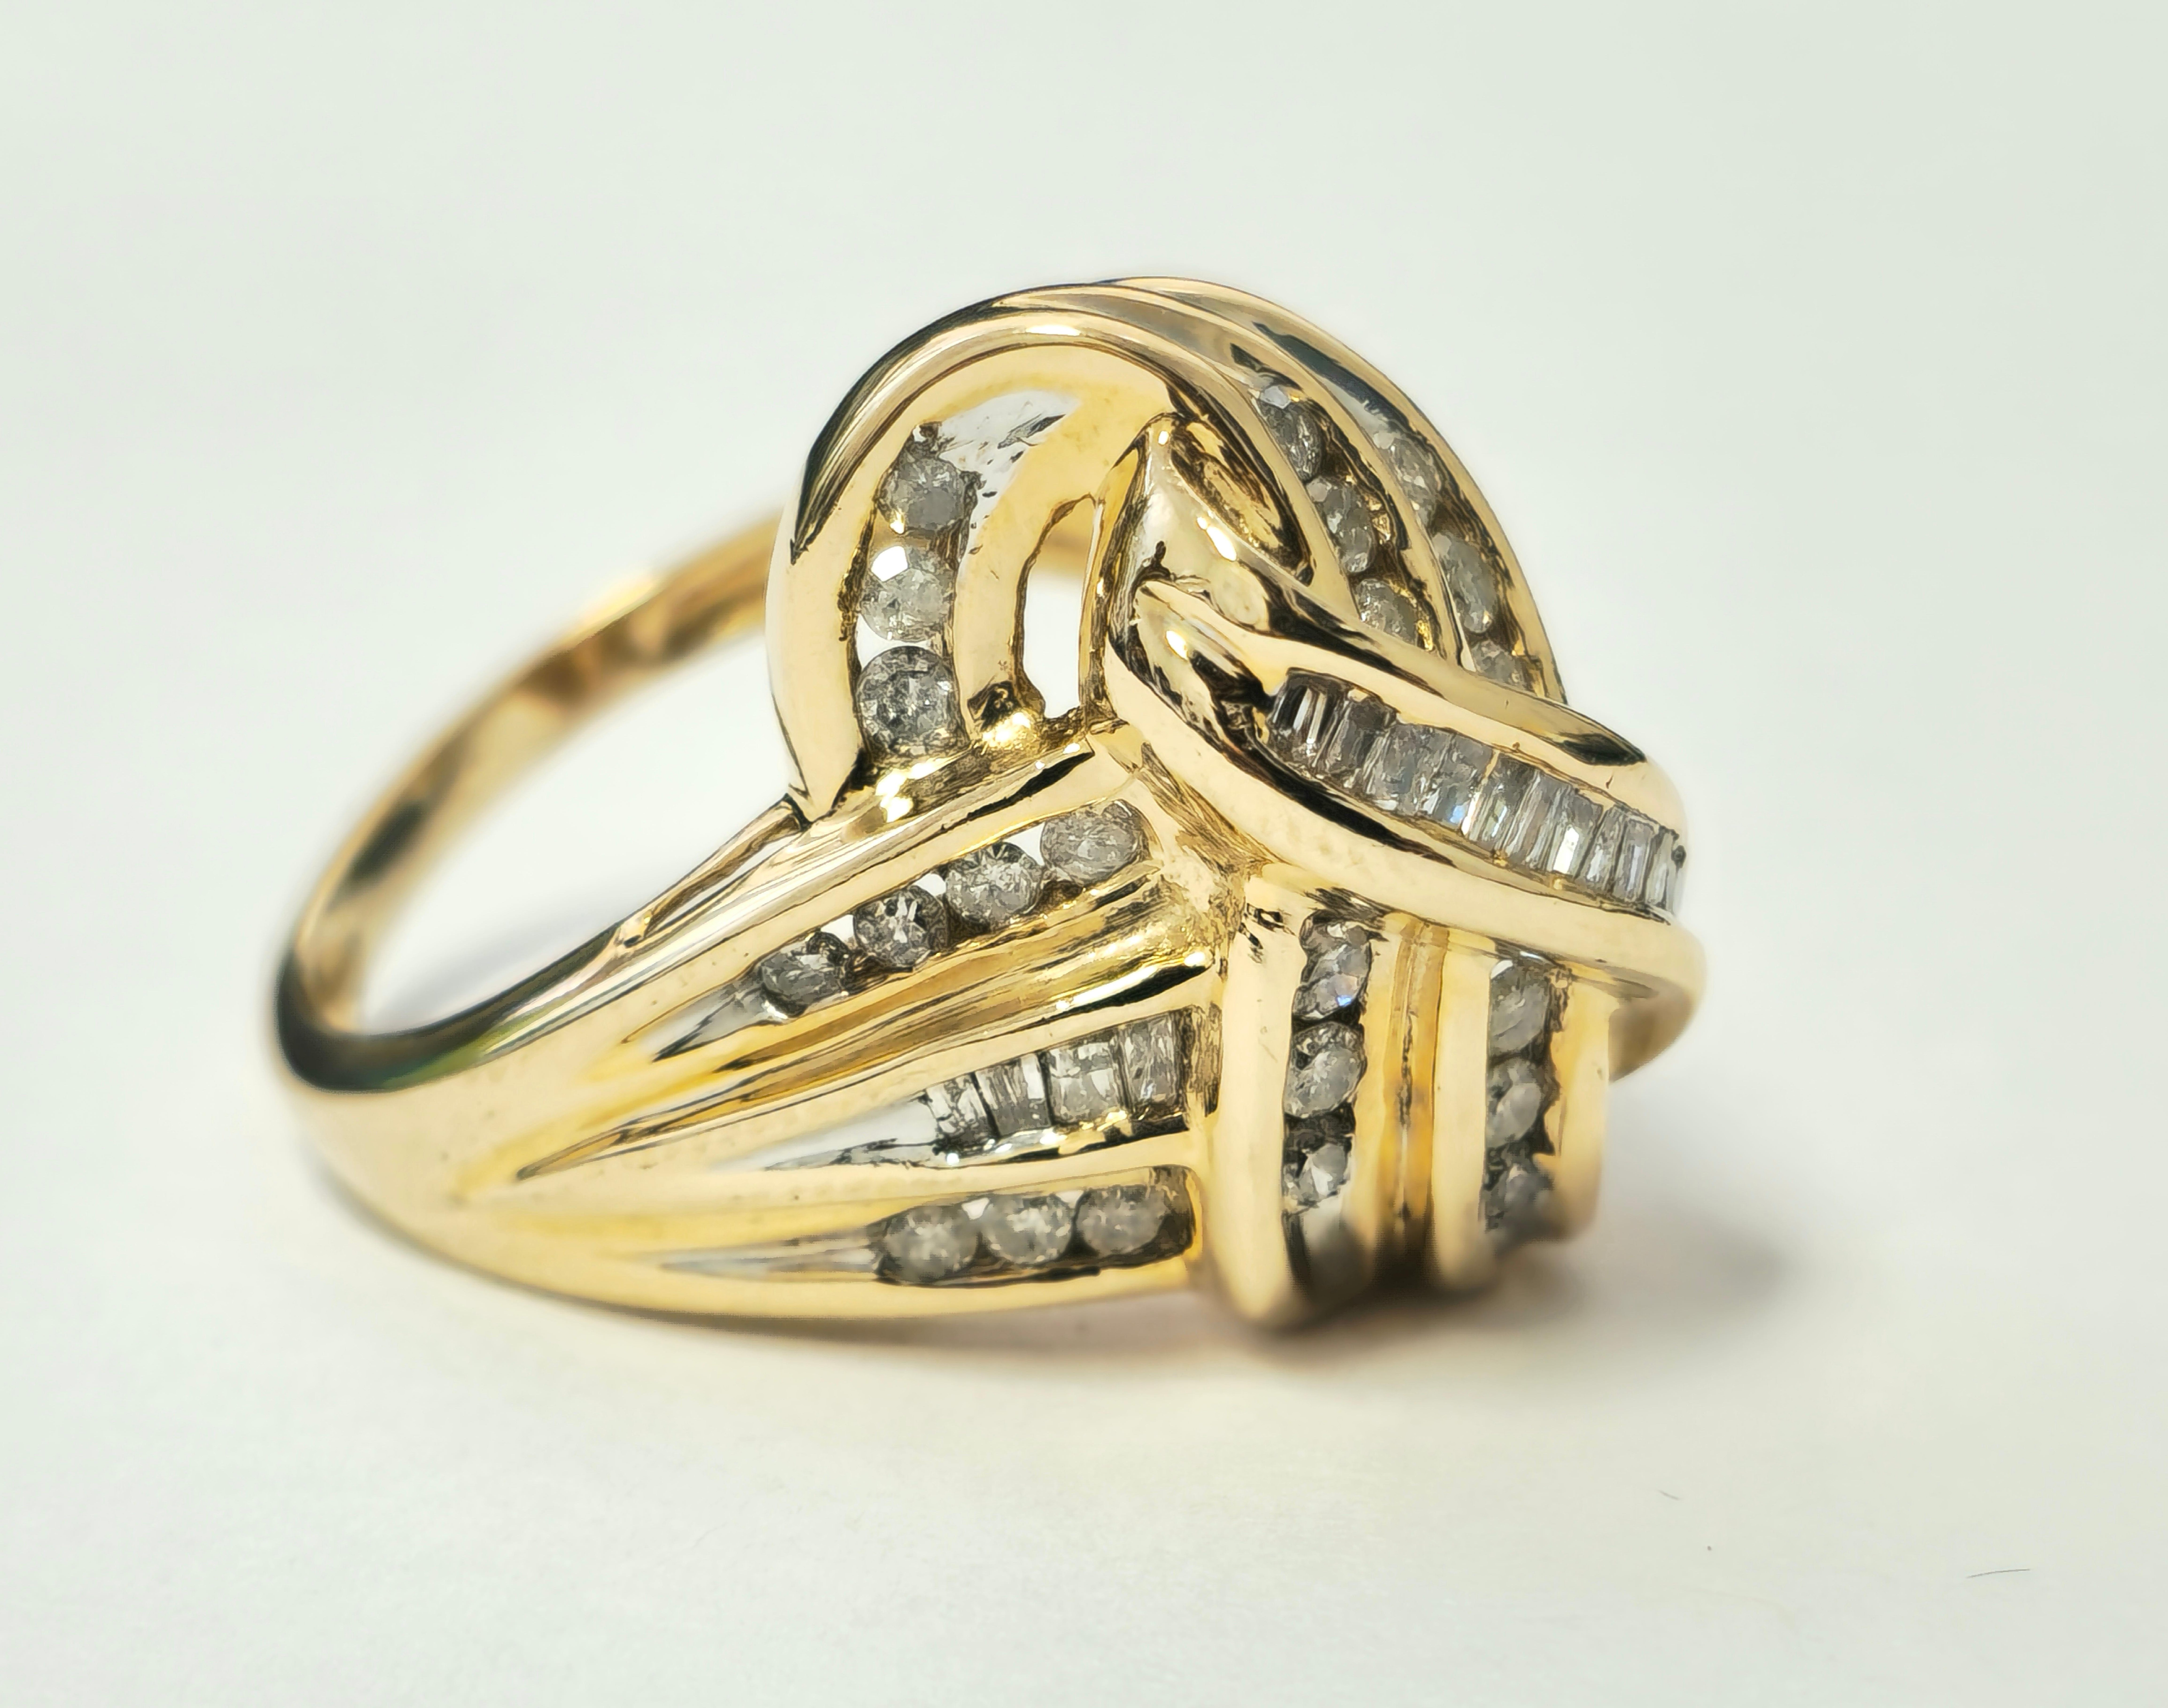 Medieval Art Deco Style Womens 2.10 Carat Diamond Engagement Ring in 14k Yellow Gold. For Sale